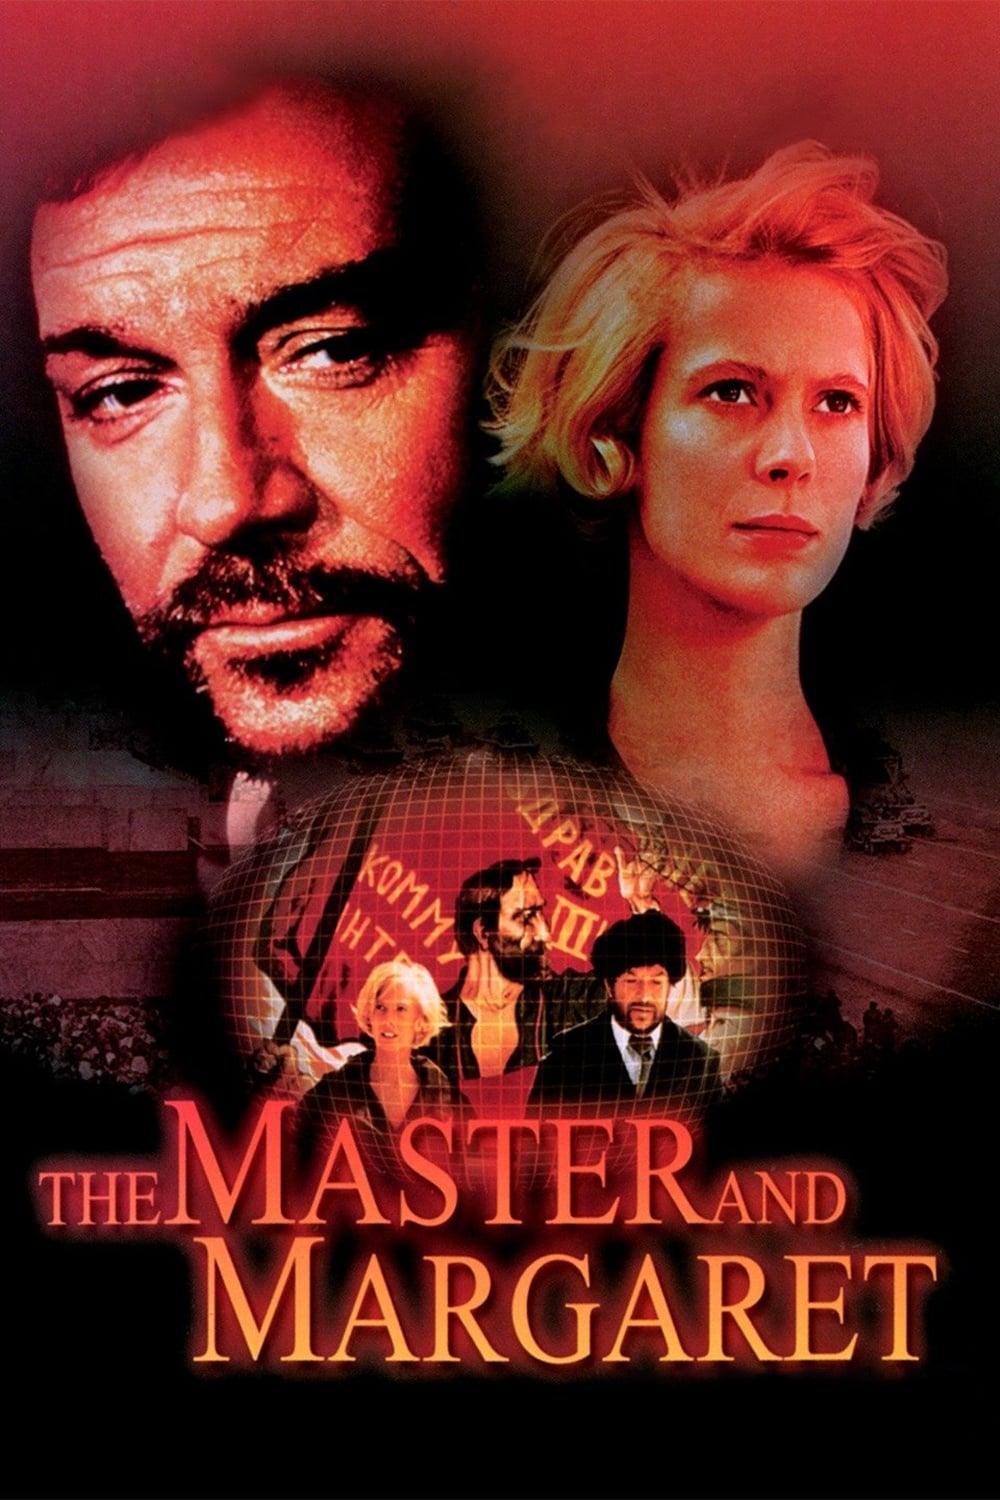 The Master and Margaret (1972)